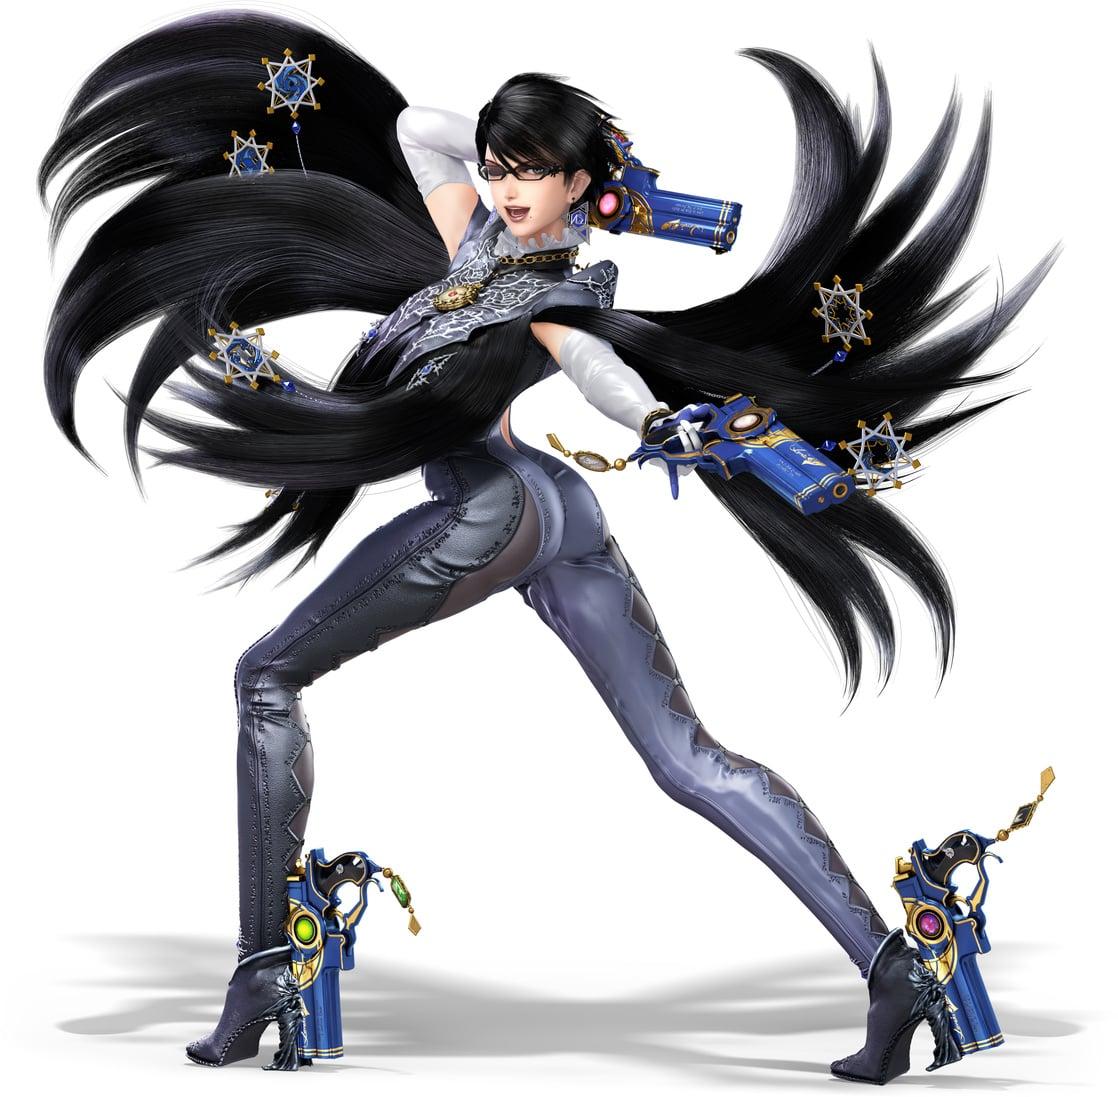 50+ Hot Pictures Of Bayonetta 32